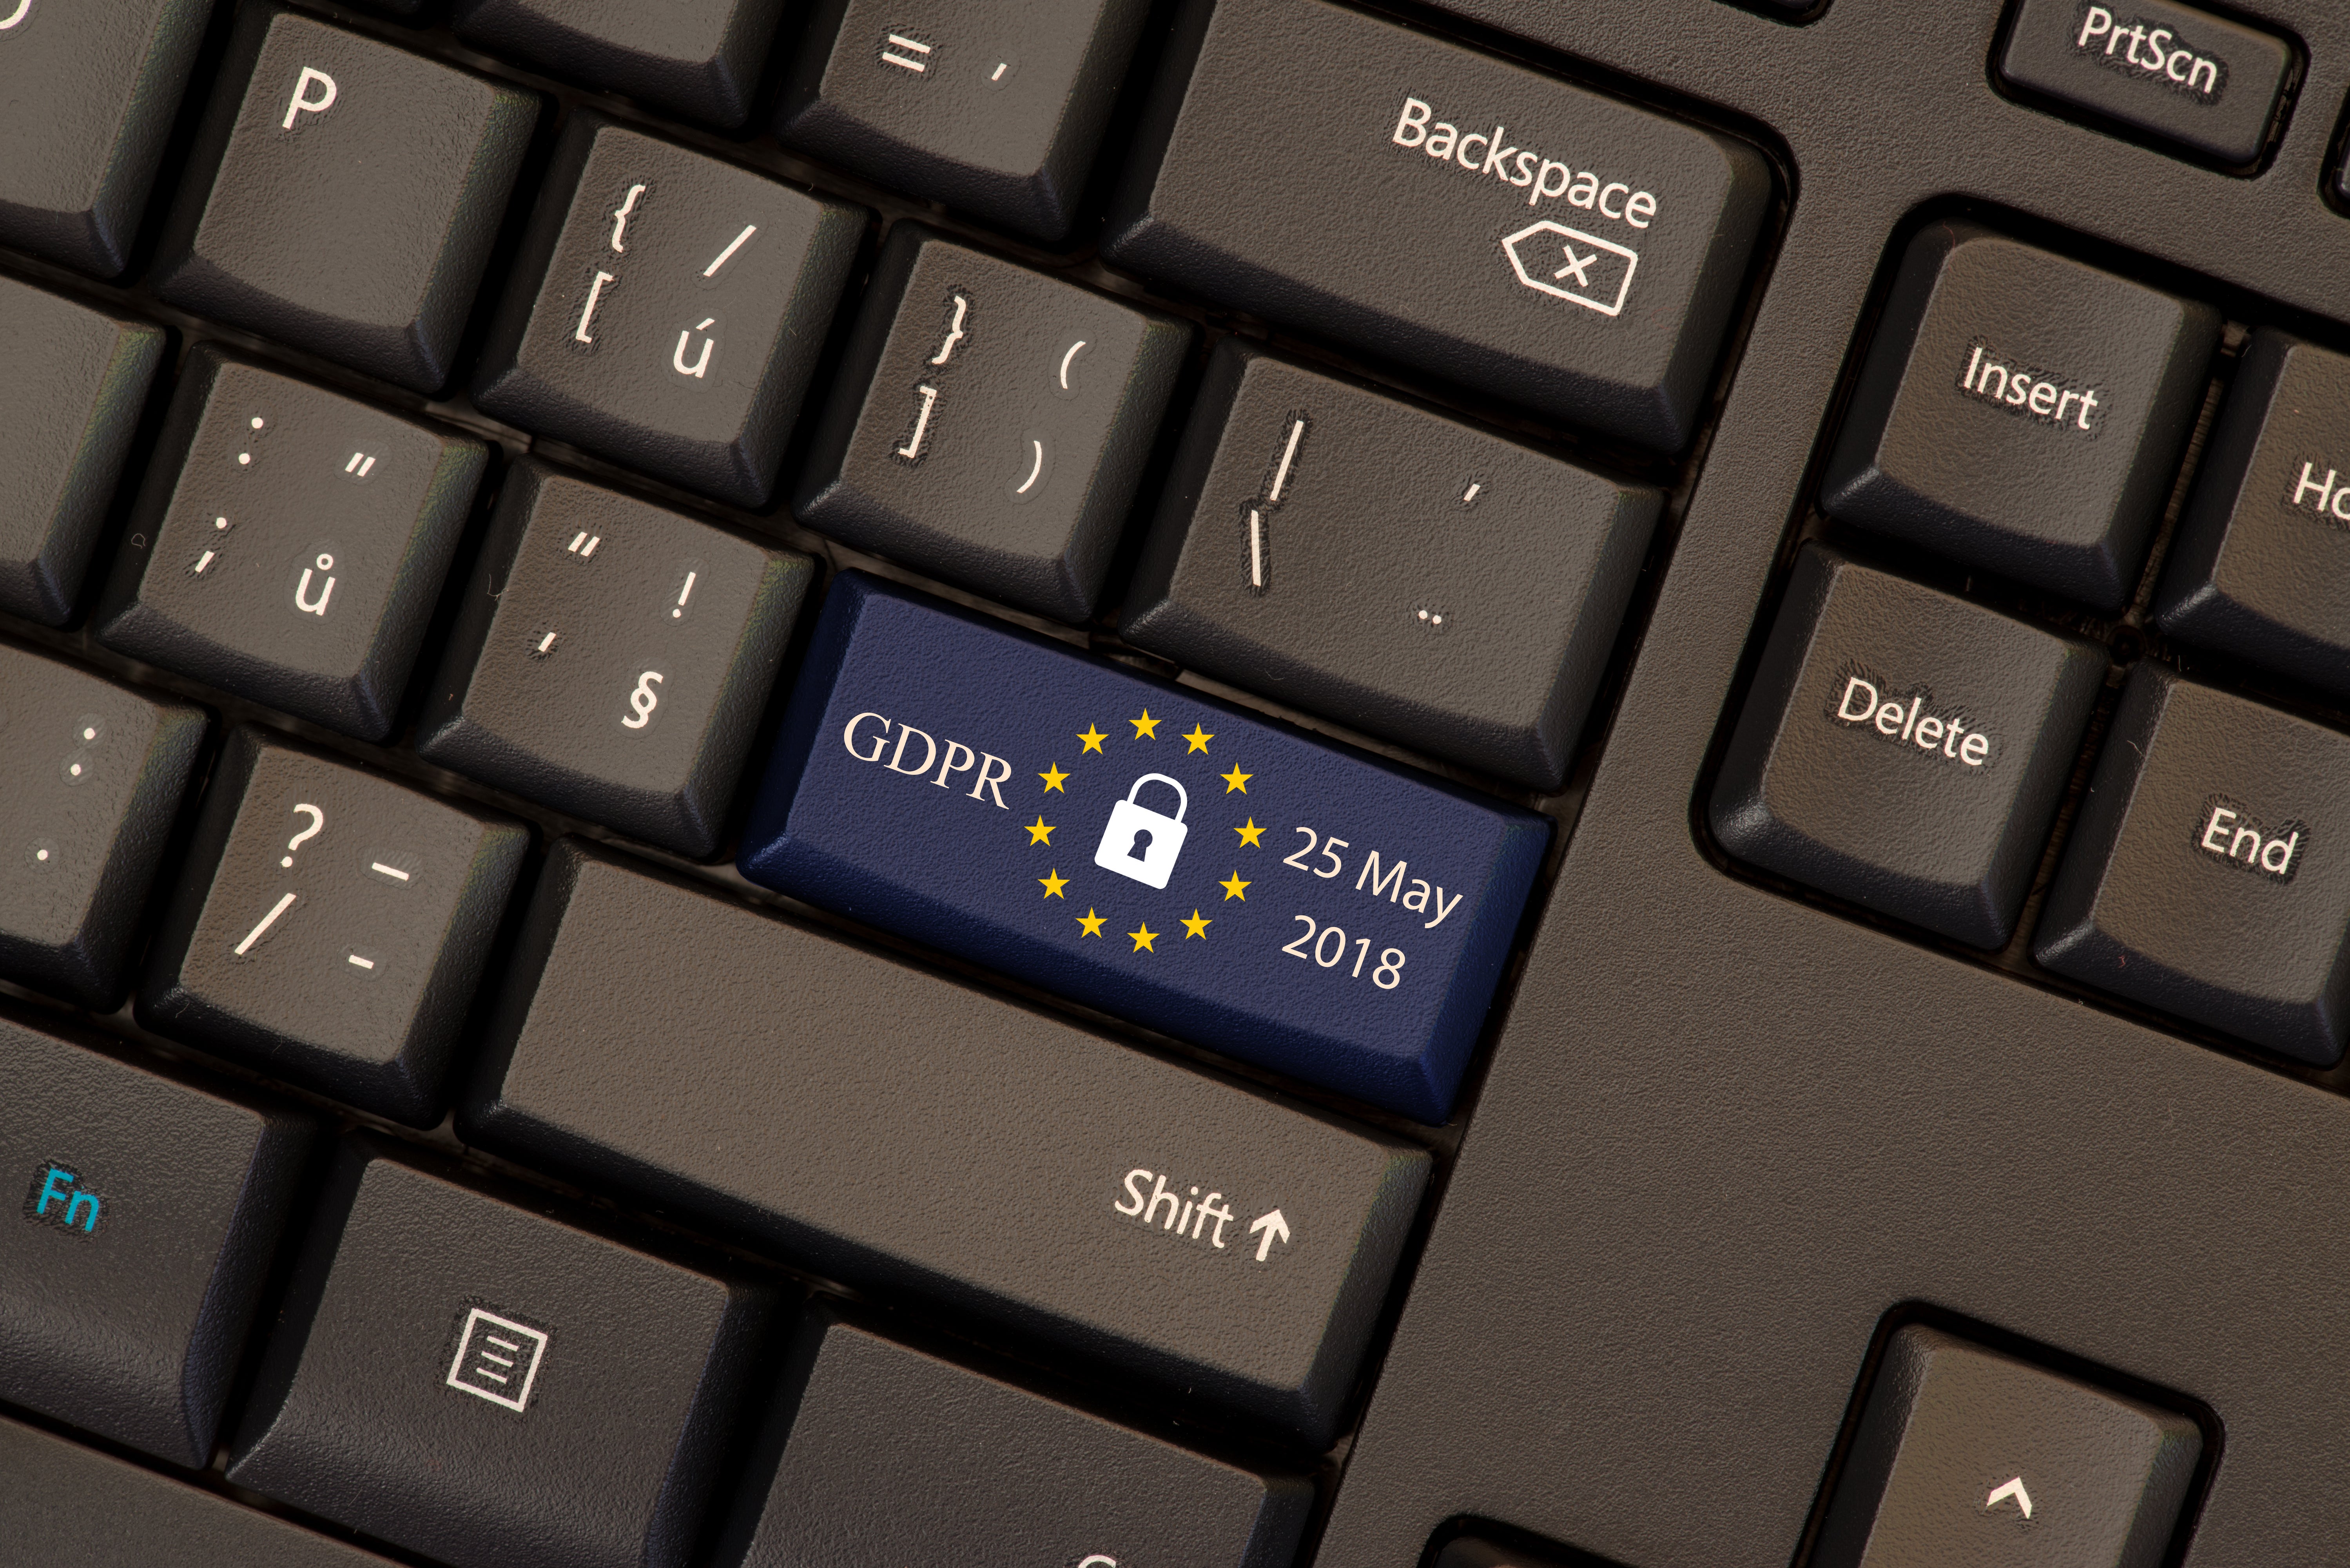 Palms Sweaty, Knees Weak, Arms Heavy? Don't Lose Yourself over GDPR